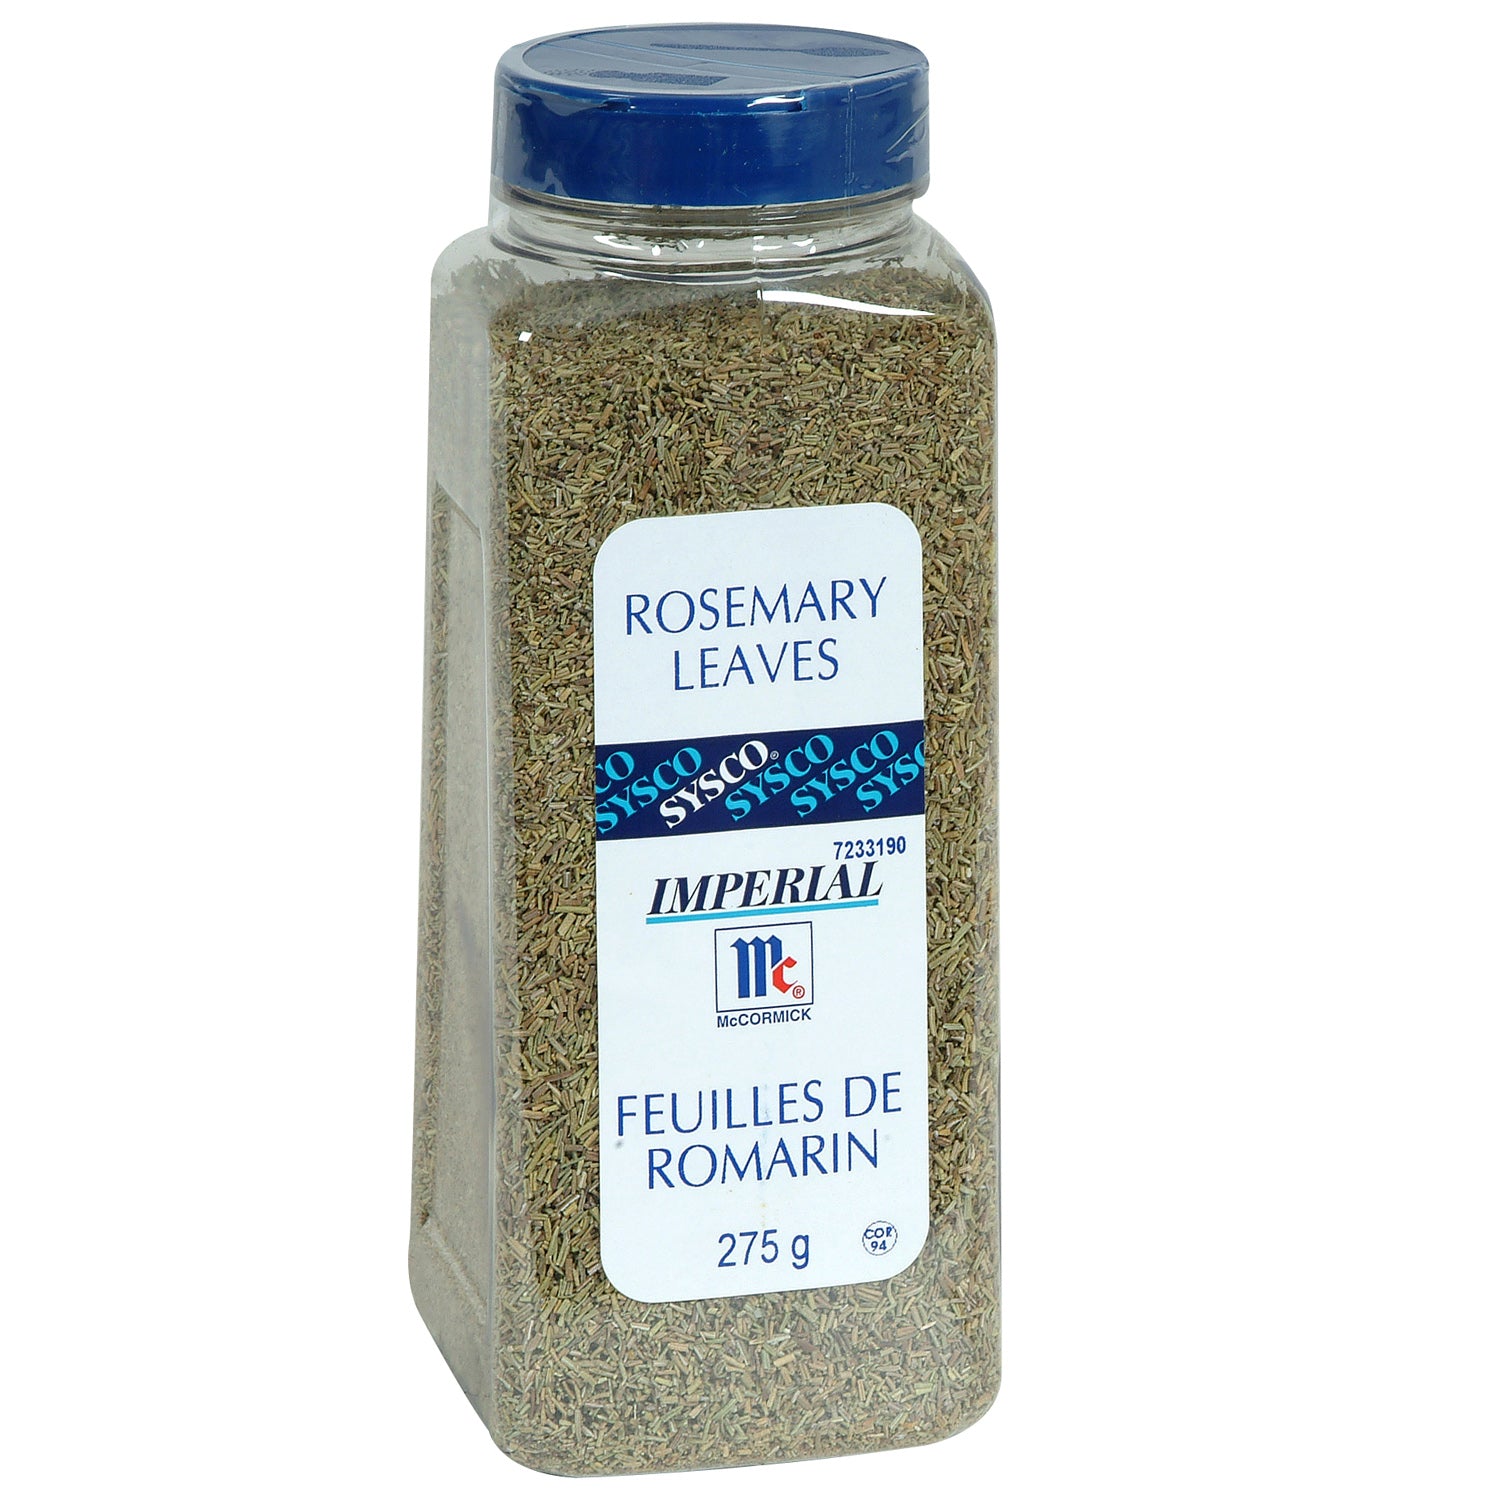 Sysco Imperial Rosemary Leaves 275g [$5.08/100g]